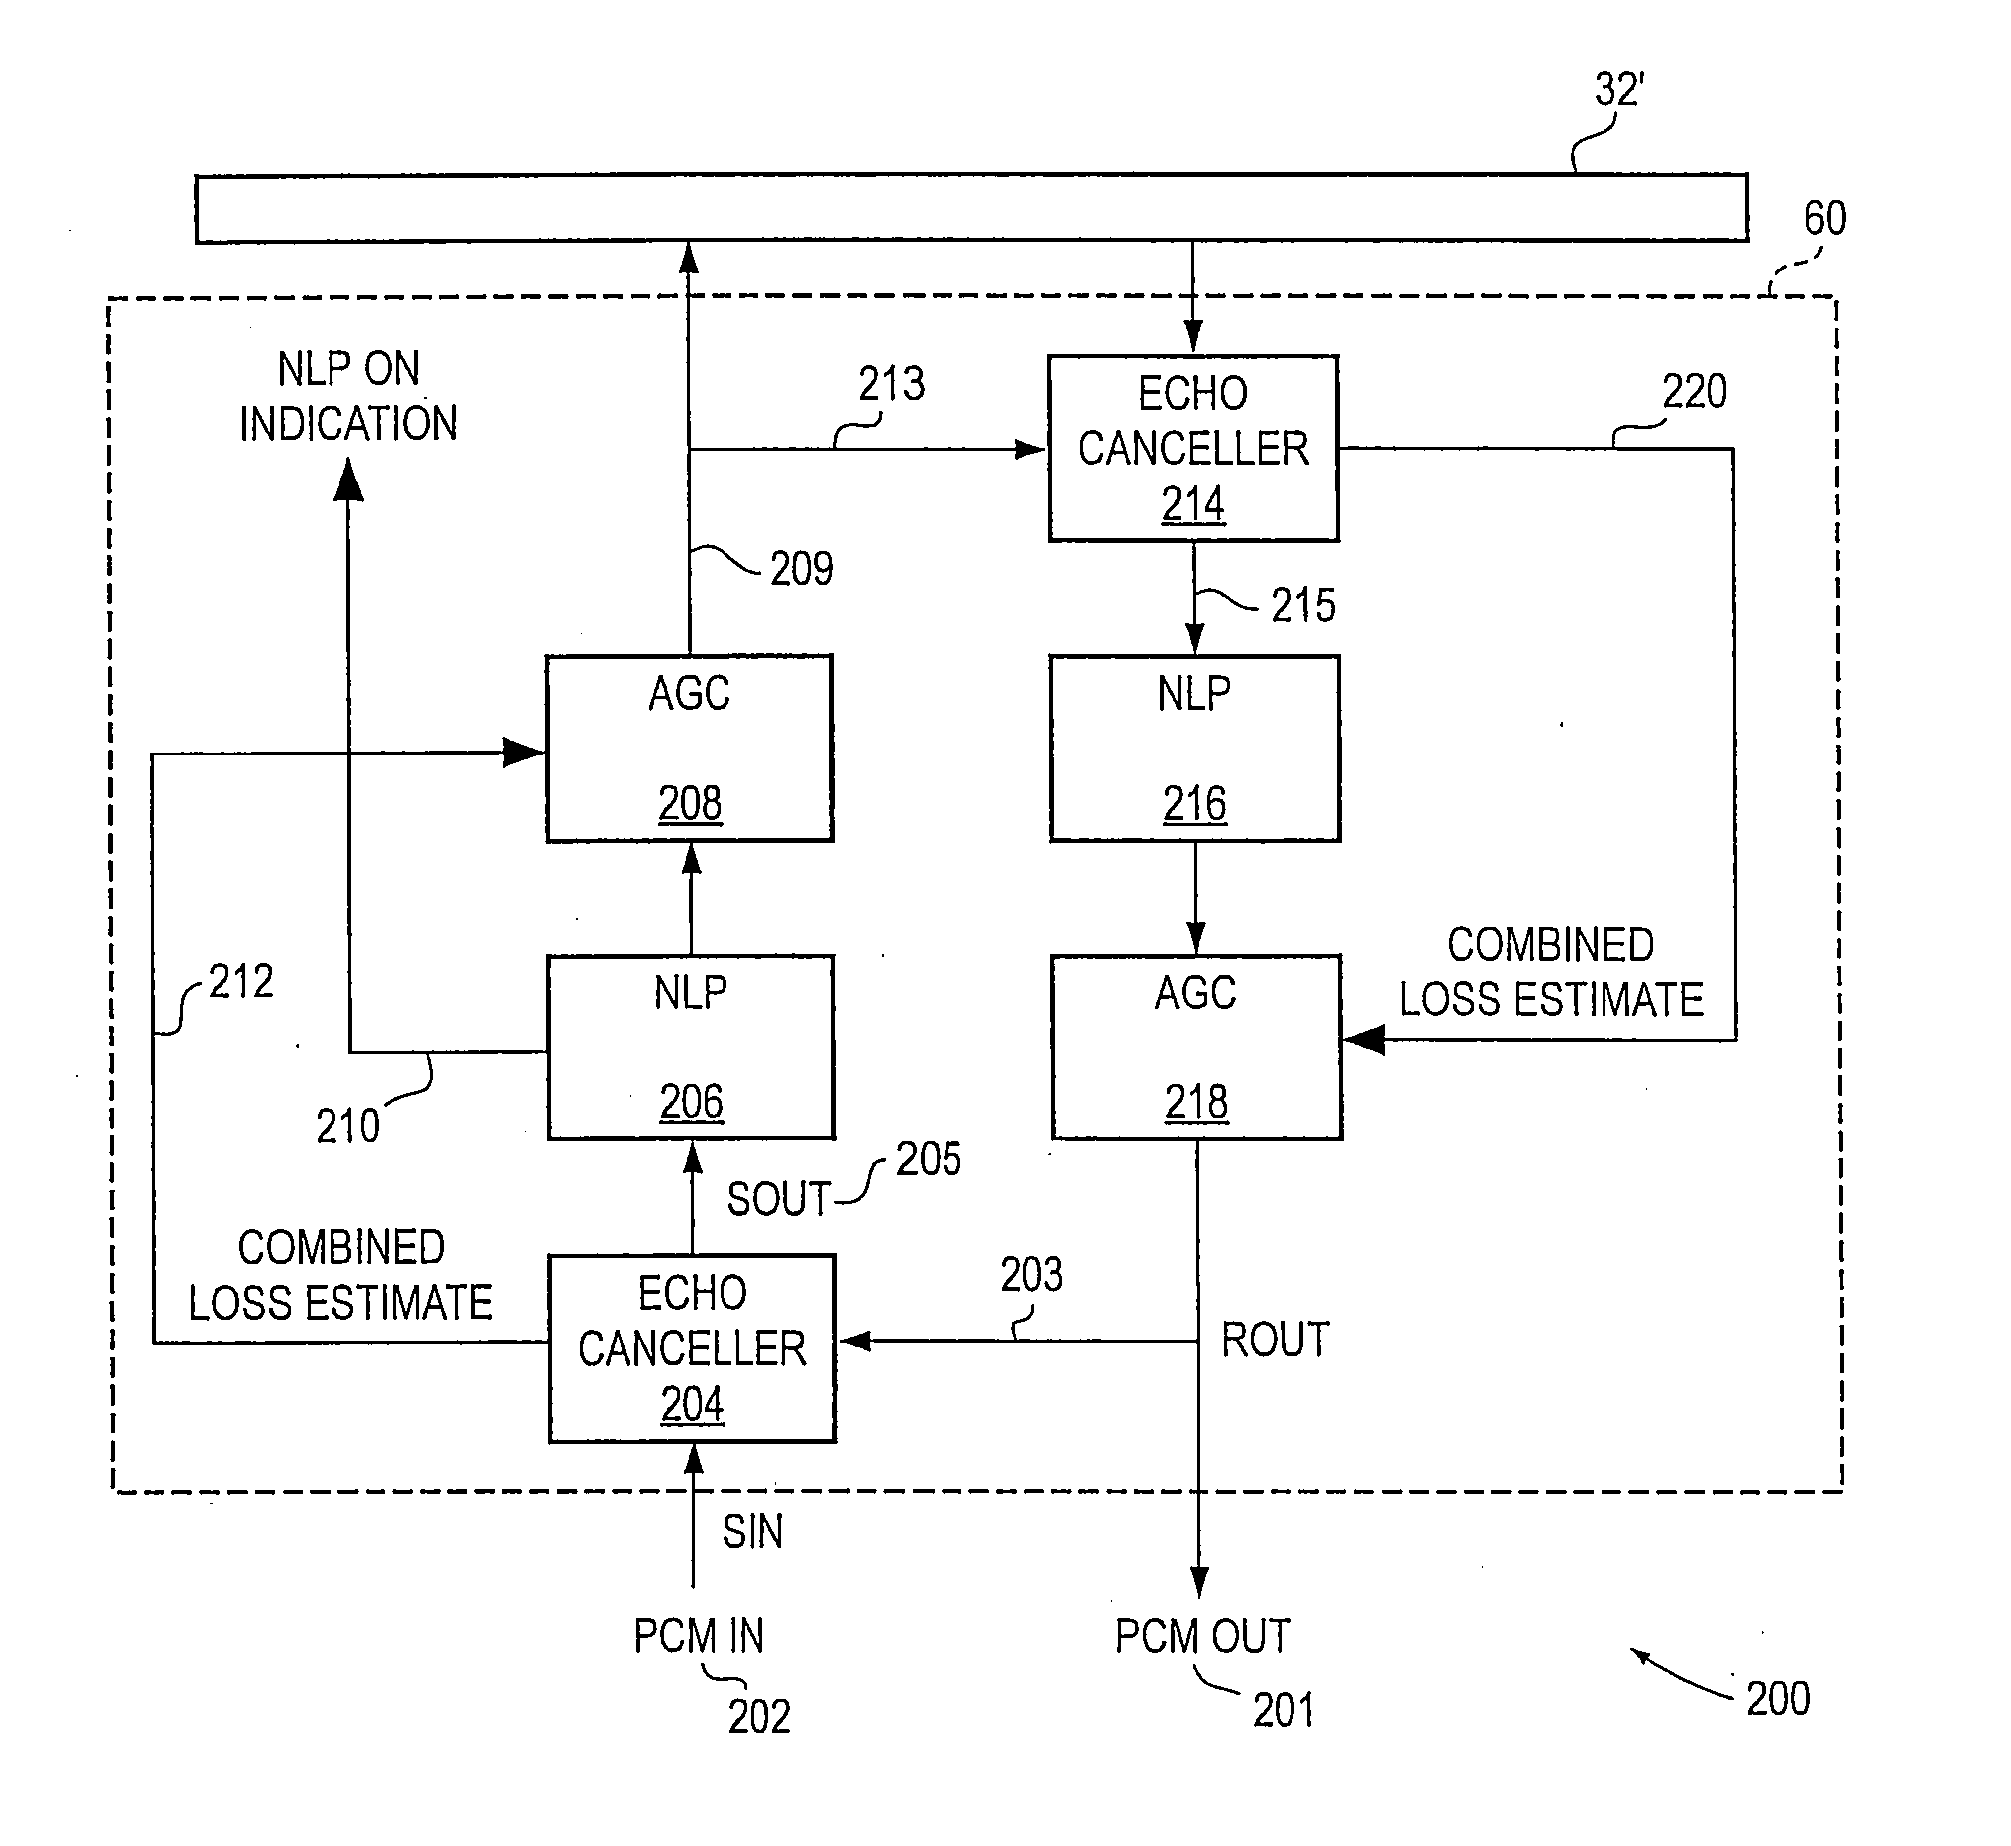 Adaptive gain control based on echo canceller performance information